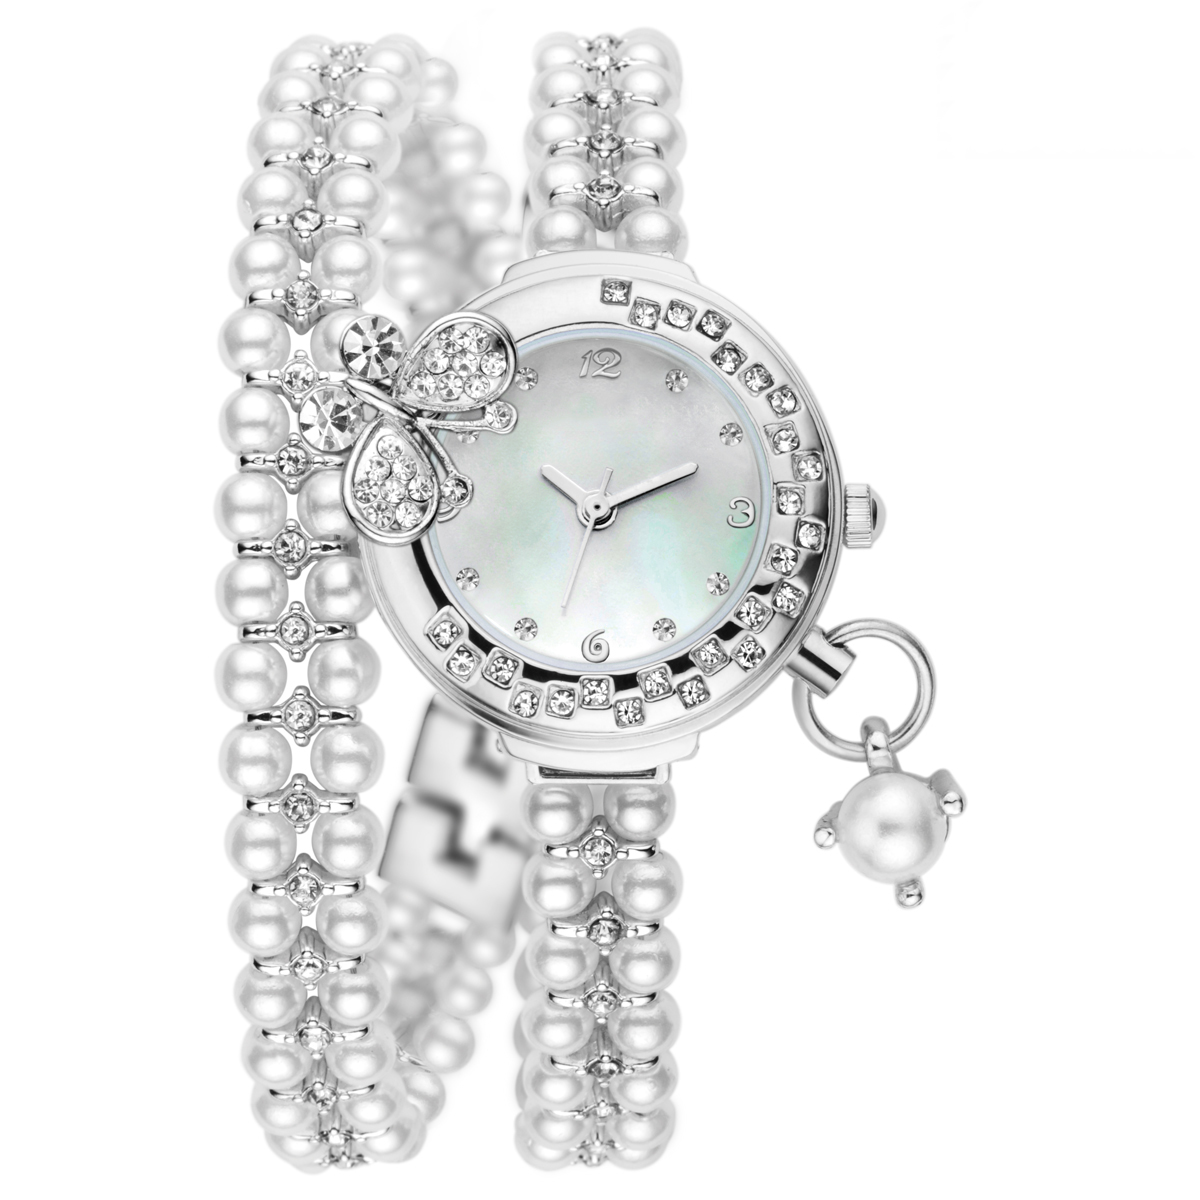 #2505 Lady's Wristwatch, Charming Bangle Bracelet Watch White Silver Plated Pearls with a 3D Butterfly on It #2505 - pearl color